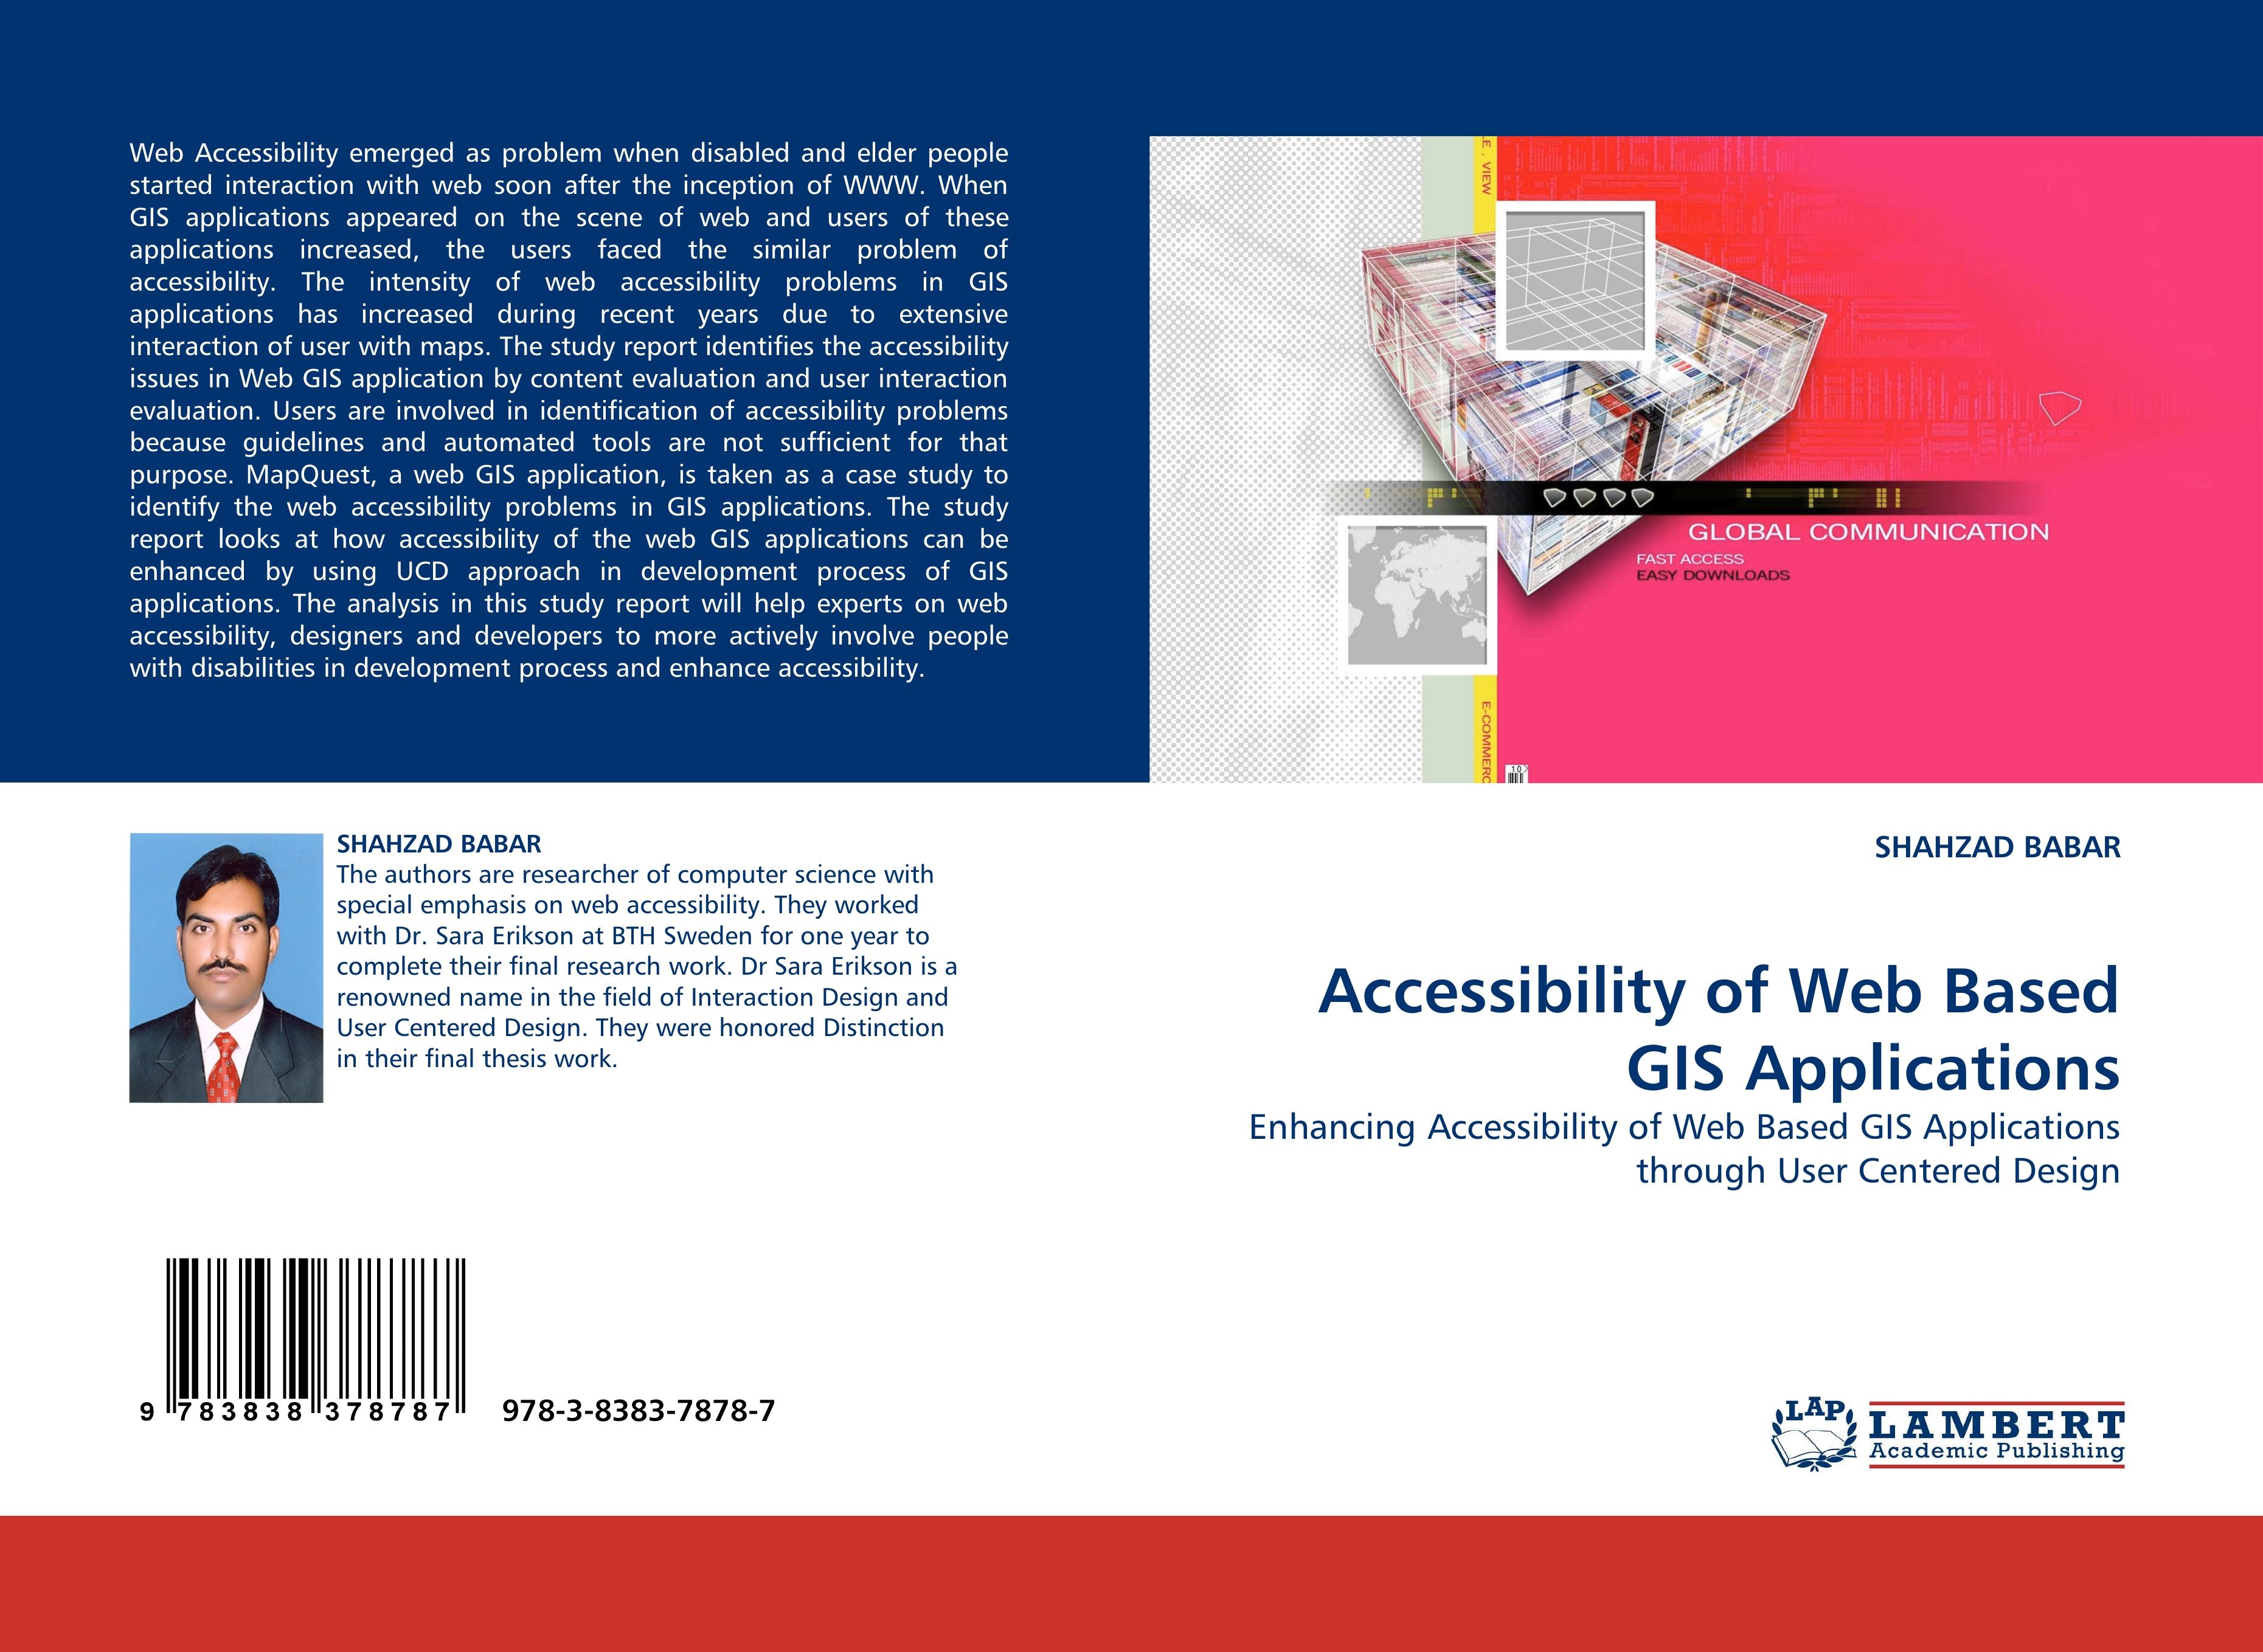 Accessibility of Web Based GIS Applications - SHAHZAD BABAR